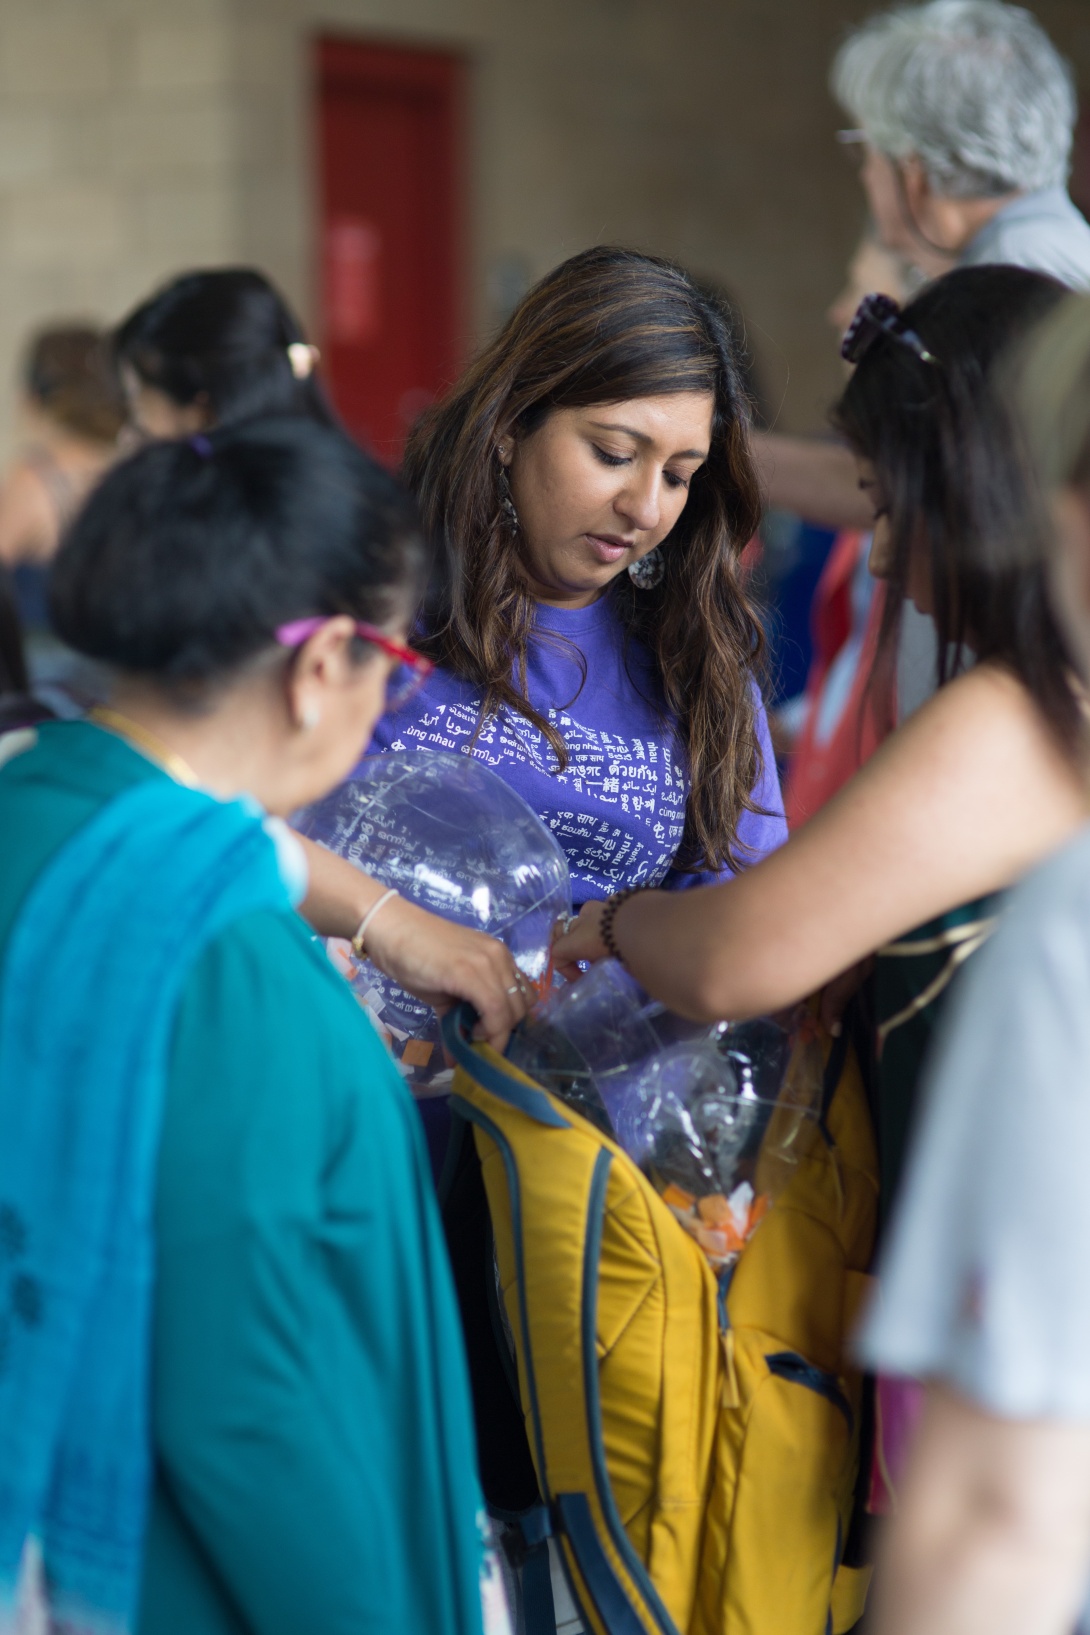 A South Asian woman fills a yellow backpack with items as another South Asian woman holds the backpack for her. An older South Asian woman with her back facing the camera watches them.